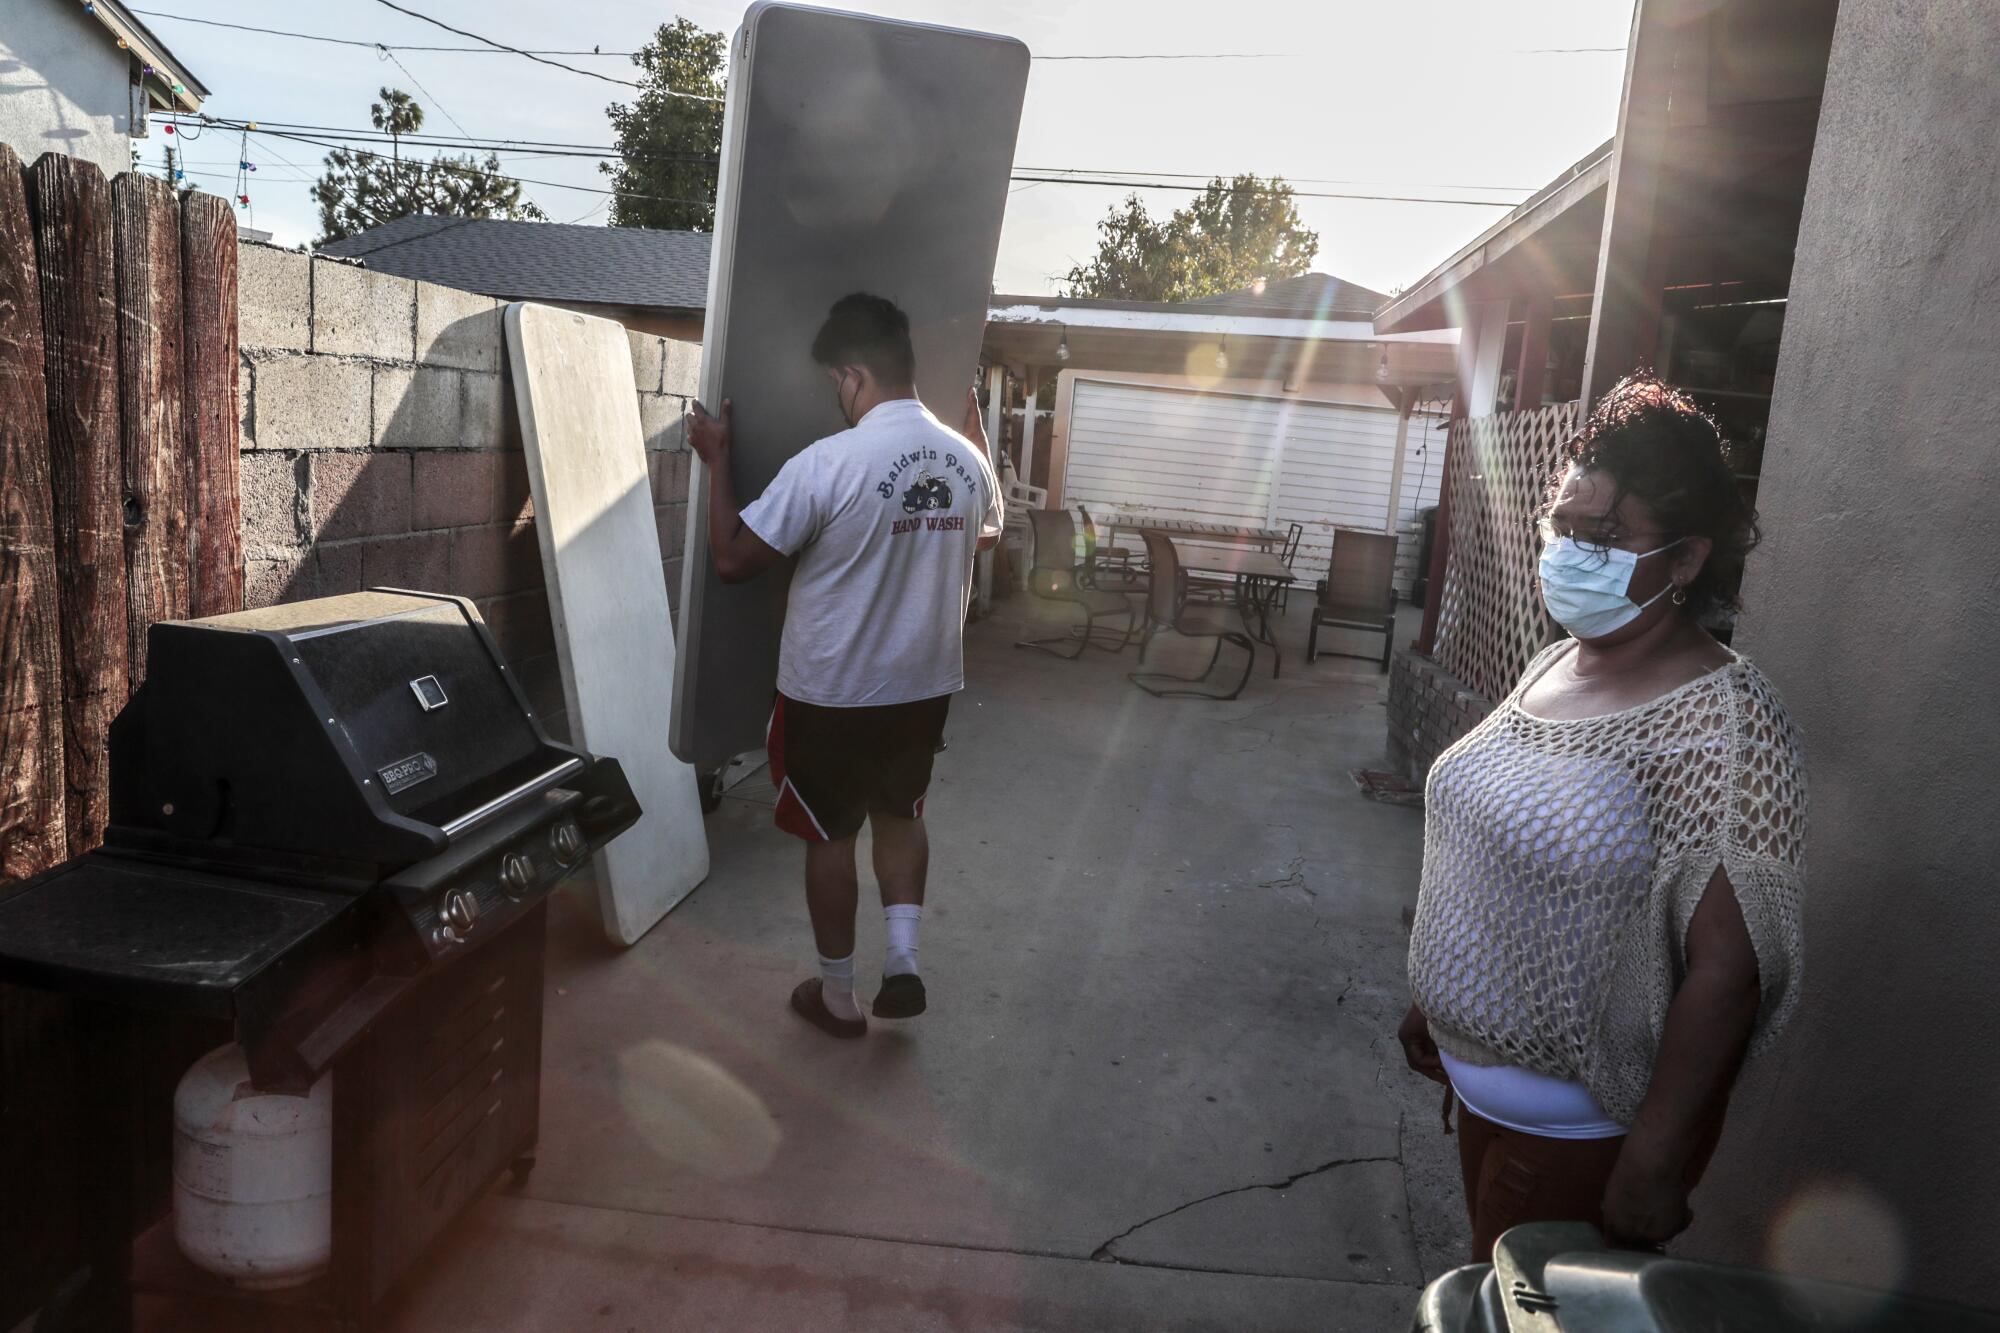 Cesar Martinez helps his mother, Maria Elena Martinez, with her business, often delivering party supplies.